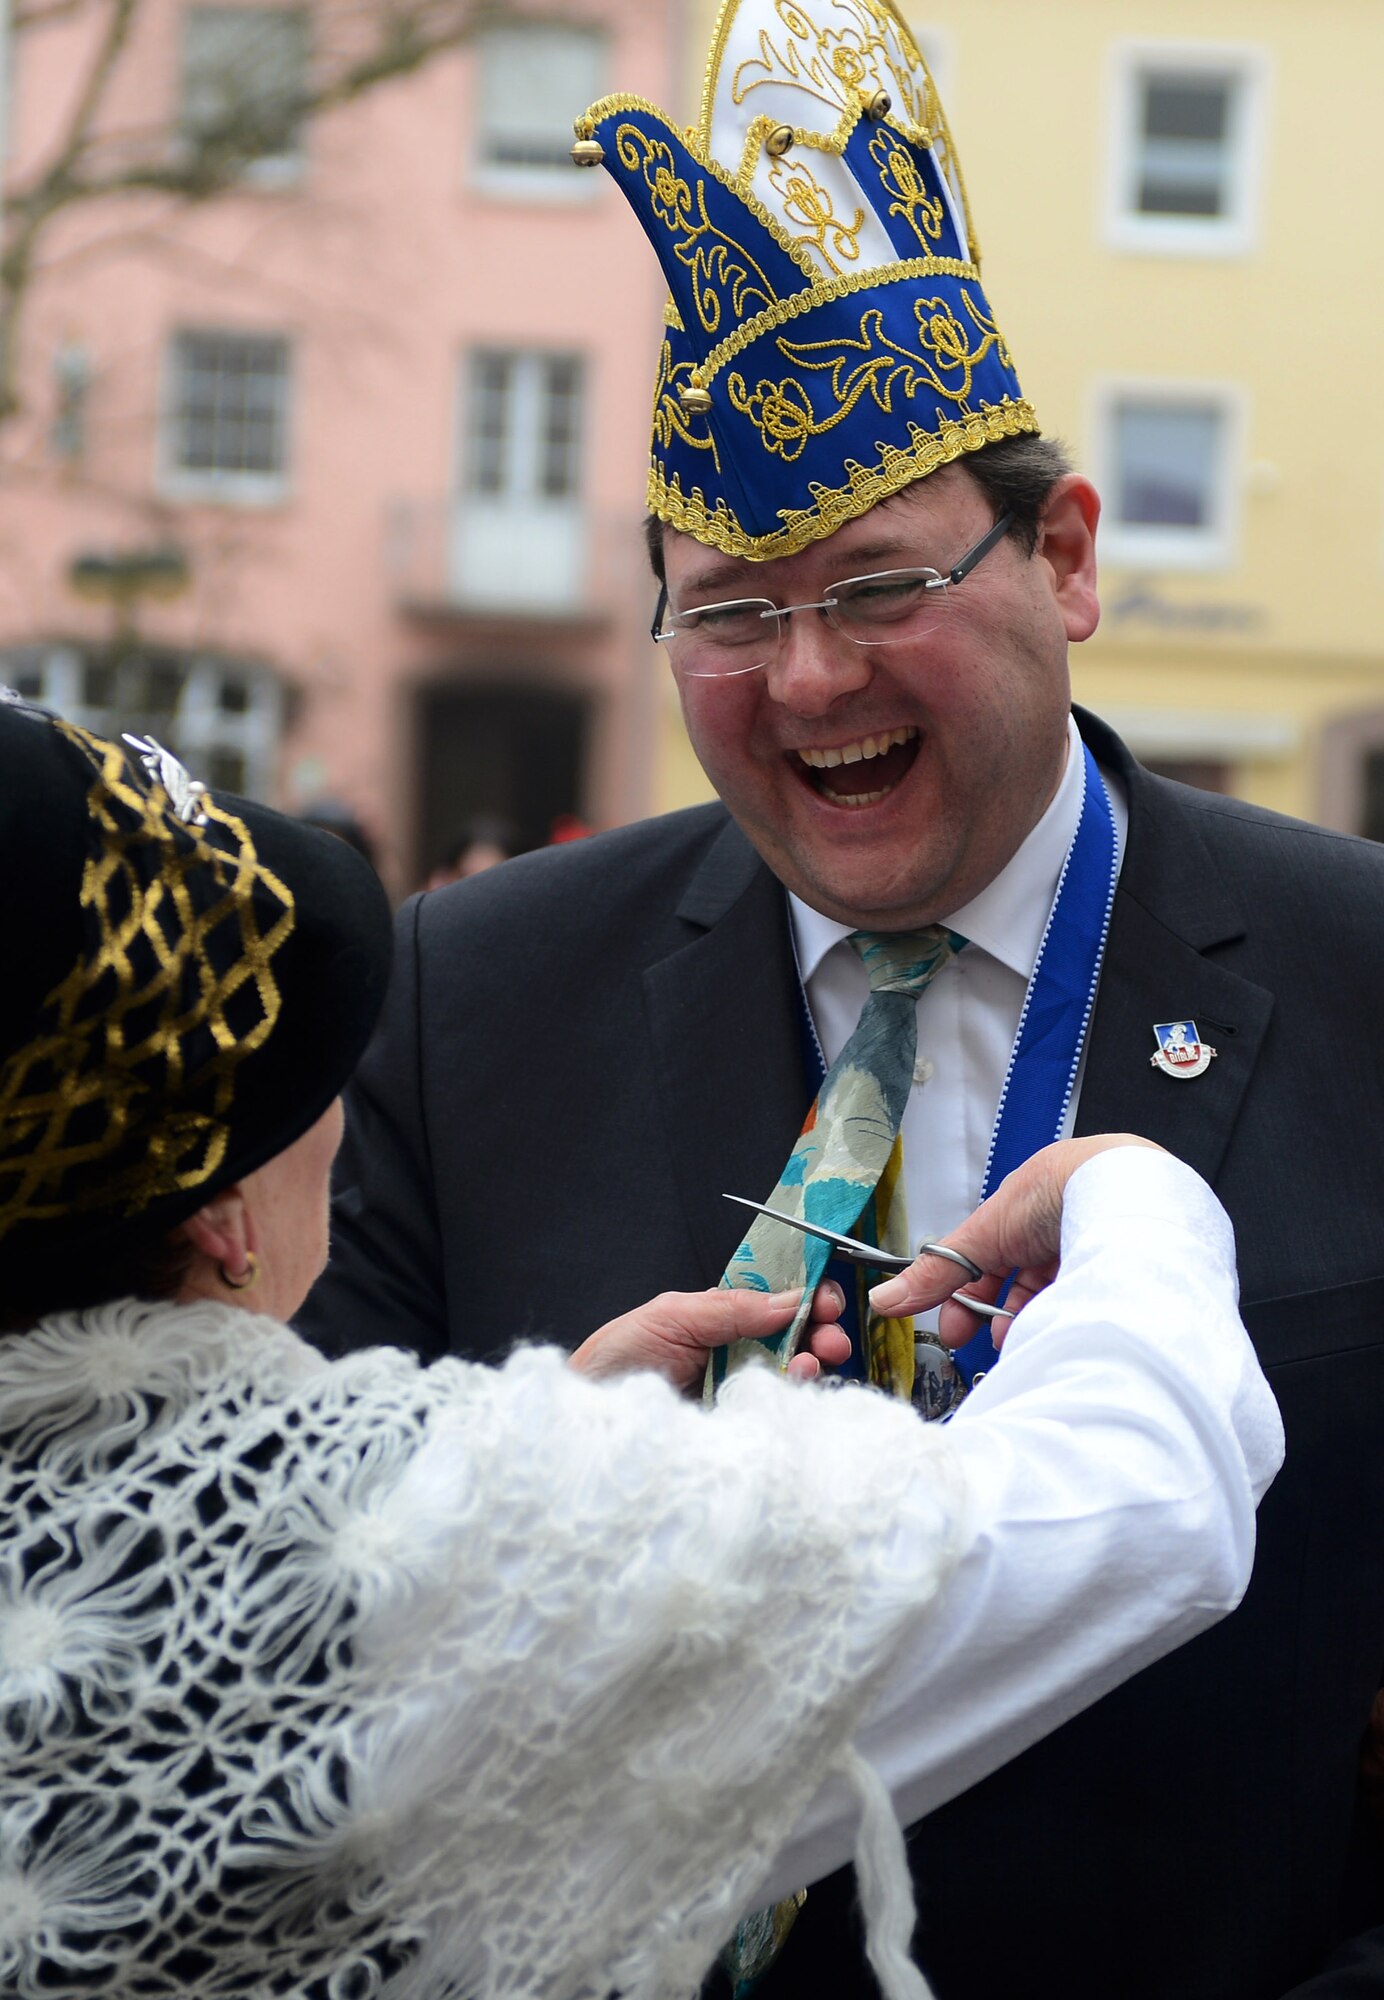 Joachim Kandels, Bitburg mayor, gets his tie cut off during the 2015 Storming of the Rathaus Fasching event in Bitburg, Germany, Feb. 12, 2015. A woman cutting off a man’s tie is a longtime tradition observed during Fasching. (U.S. Air Force photo by Airman 1st Class Luke Kitterman/Released)
 
